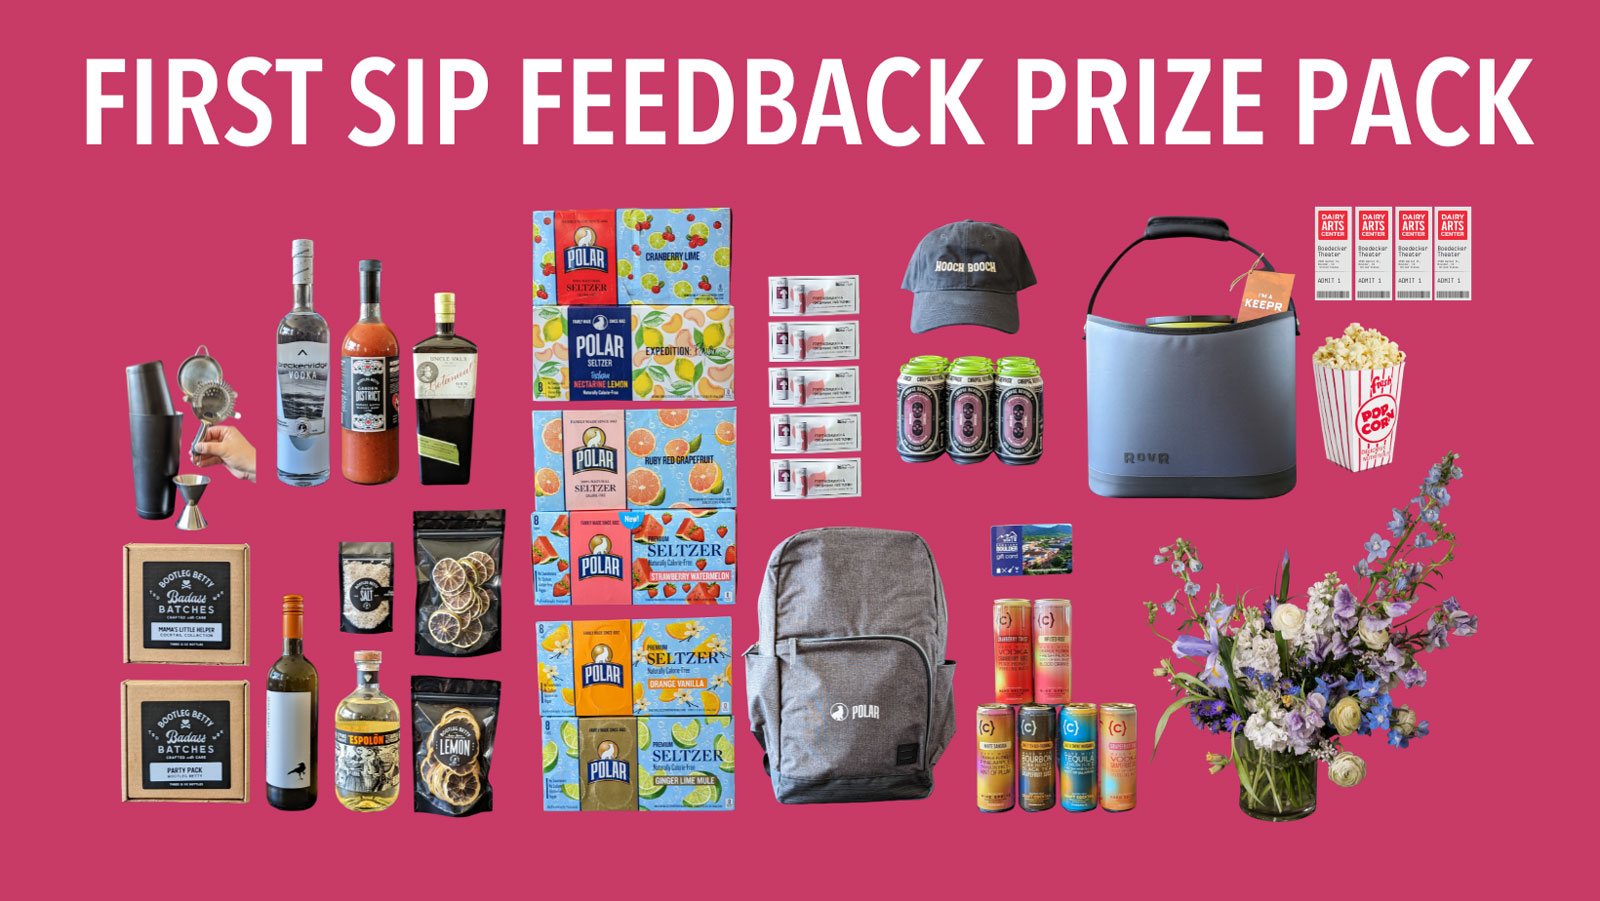 First Sip Feedback Prize Pack